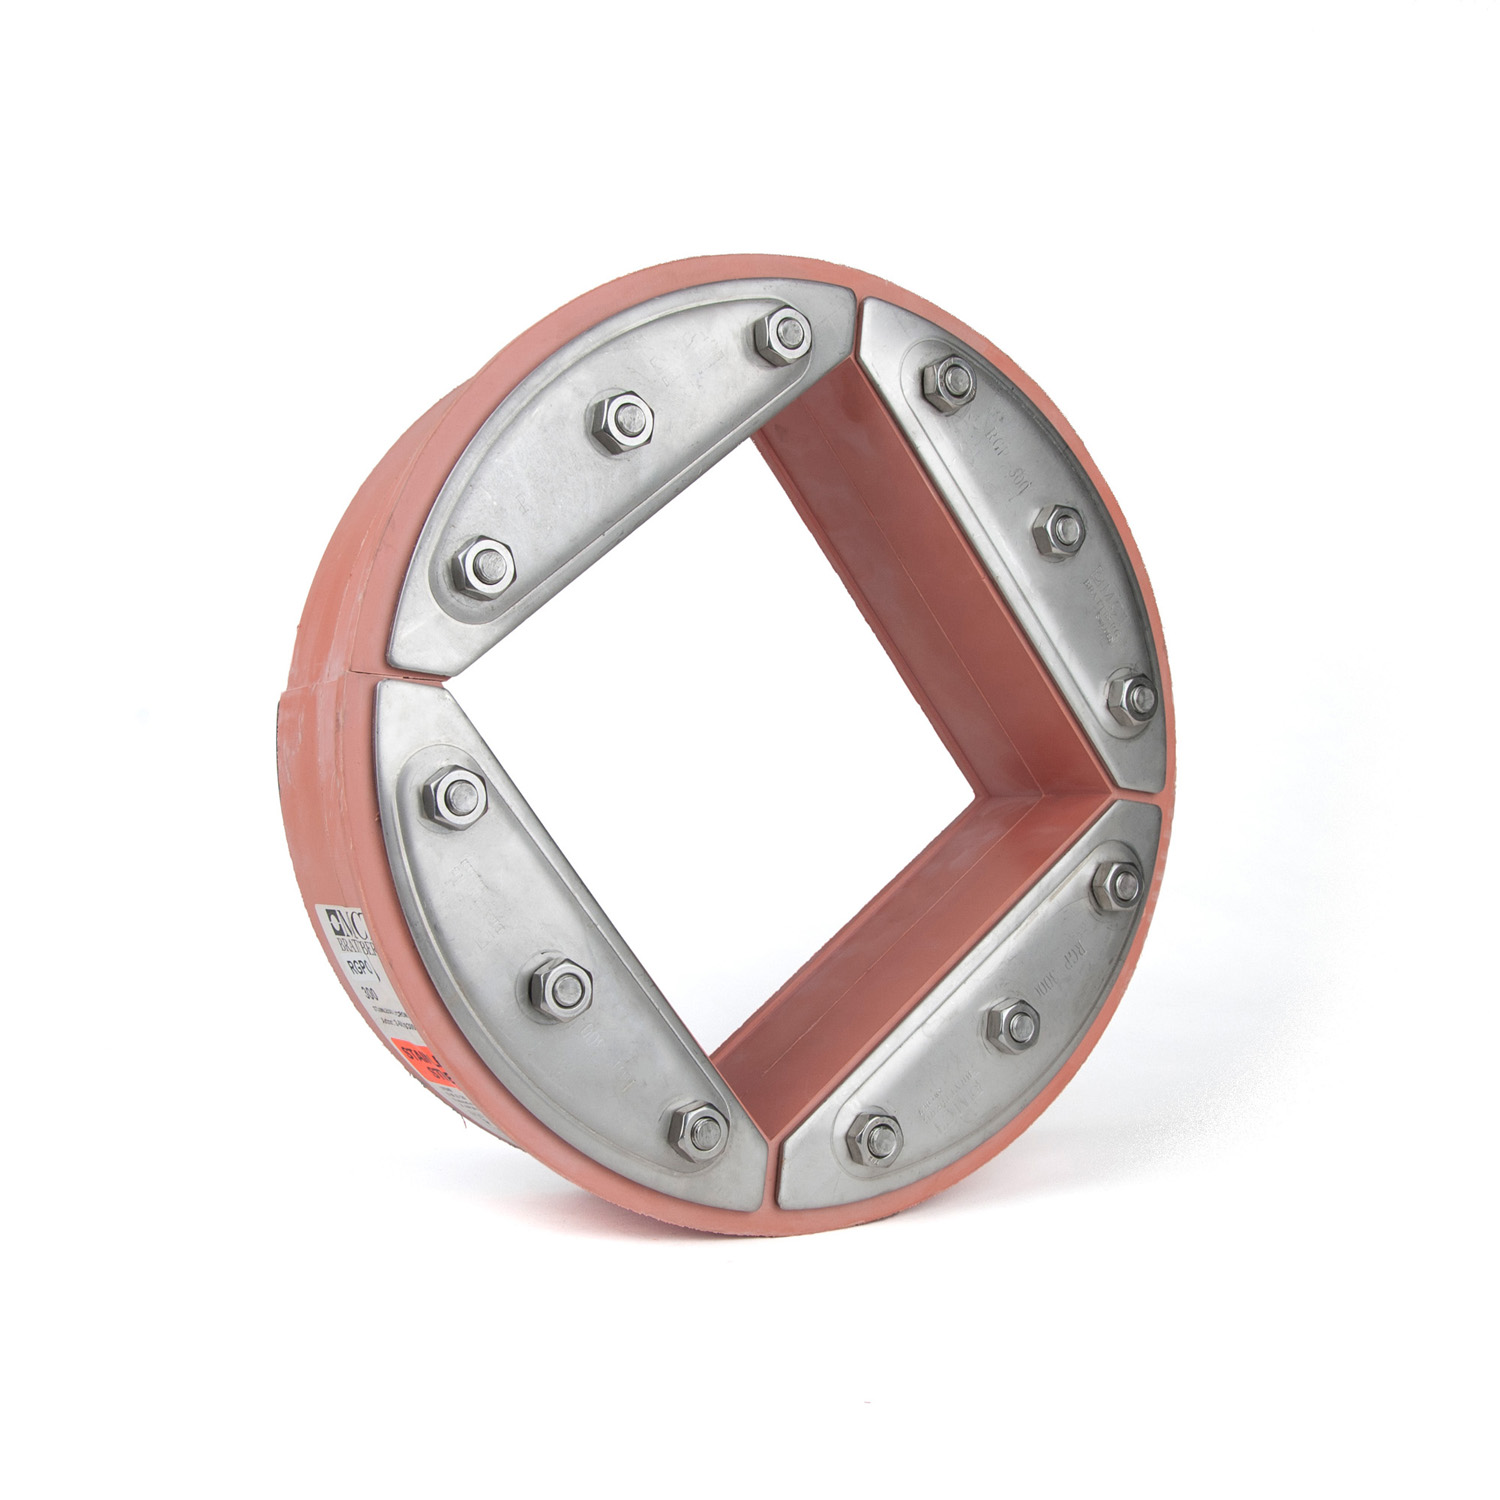 RGP300S Round frame, stainless 1 x [internal size 180x180mm]